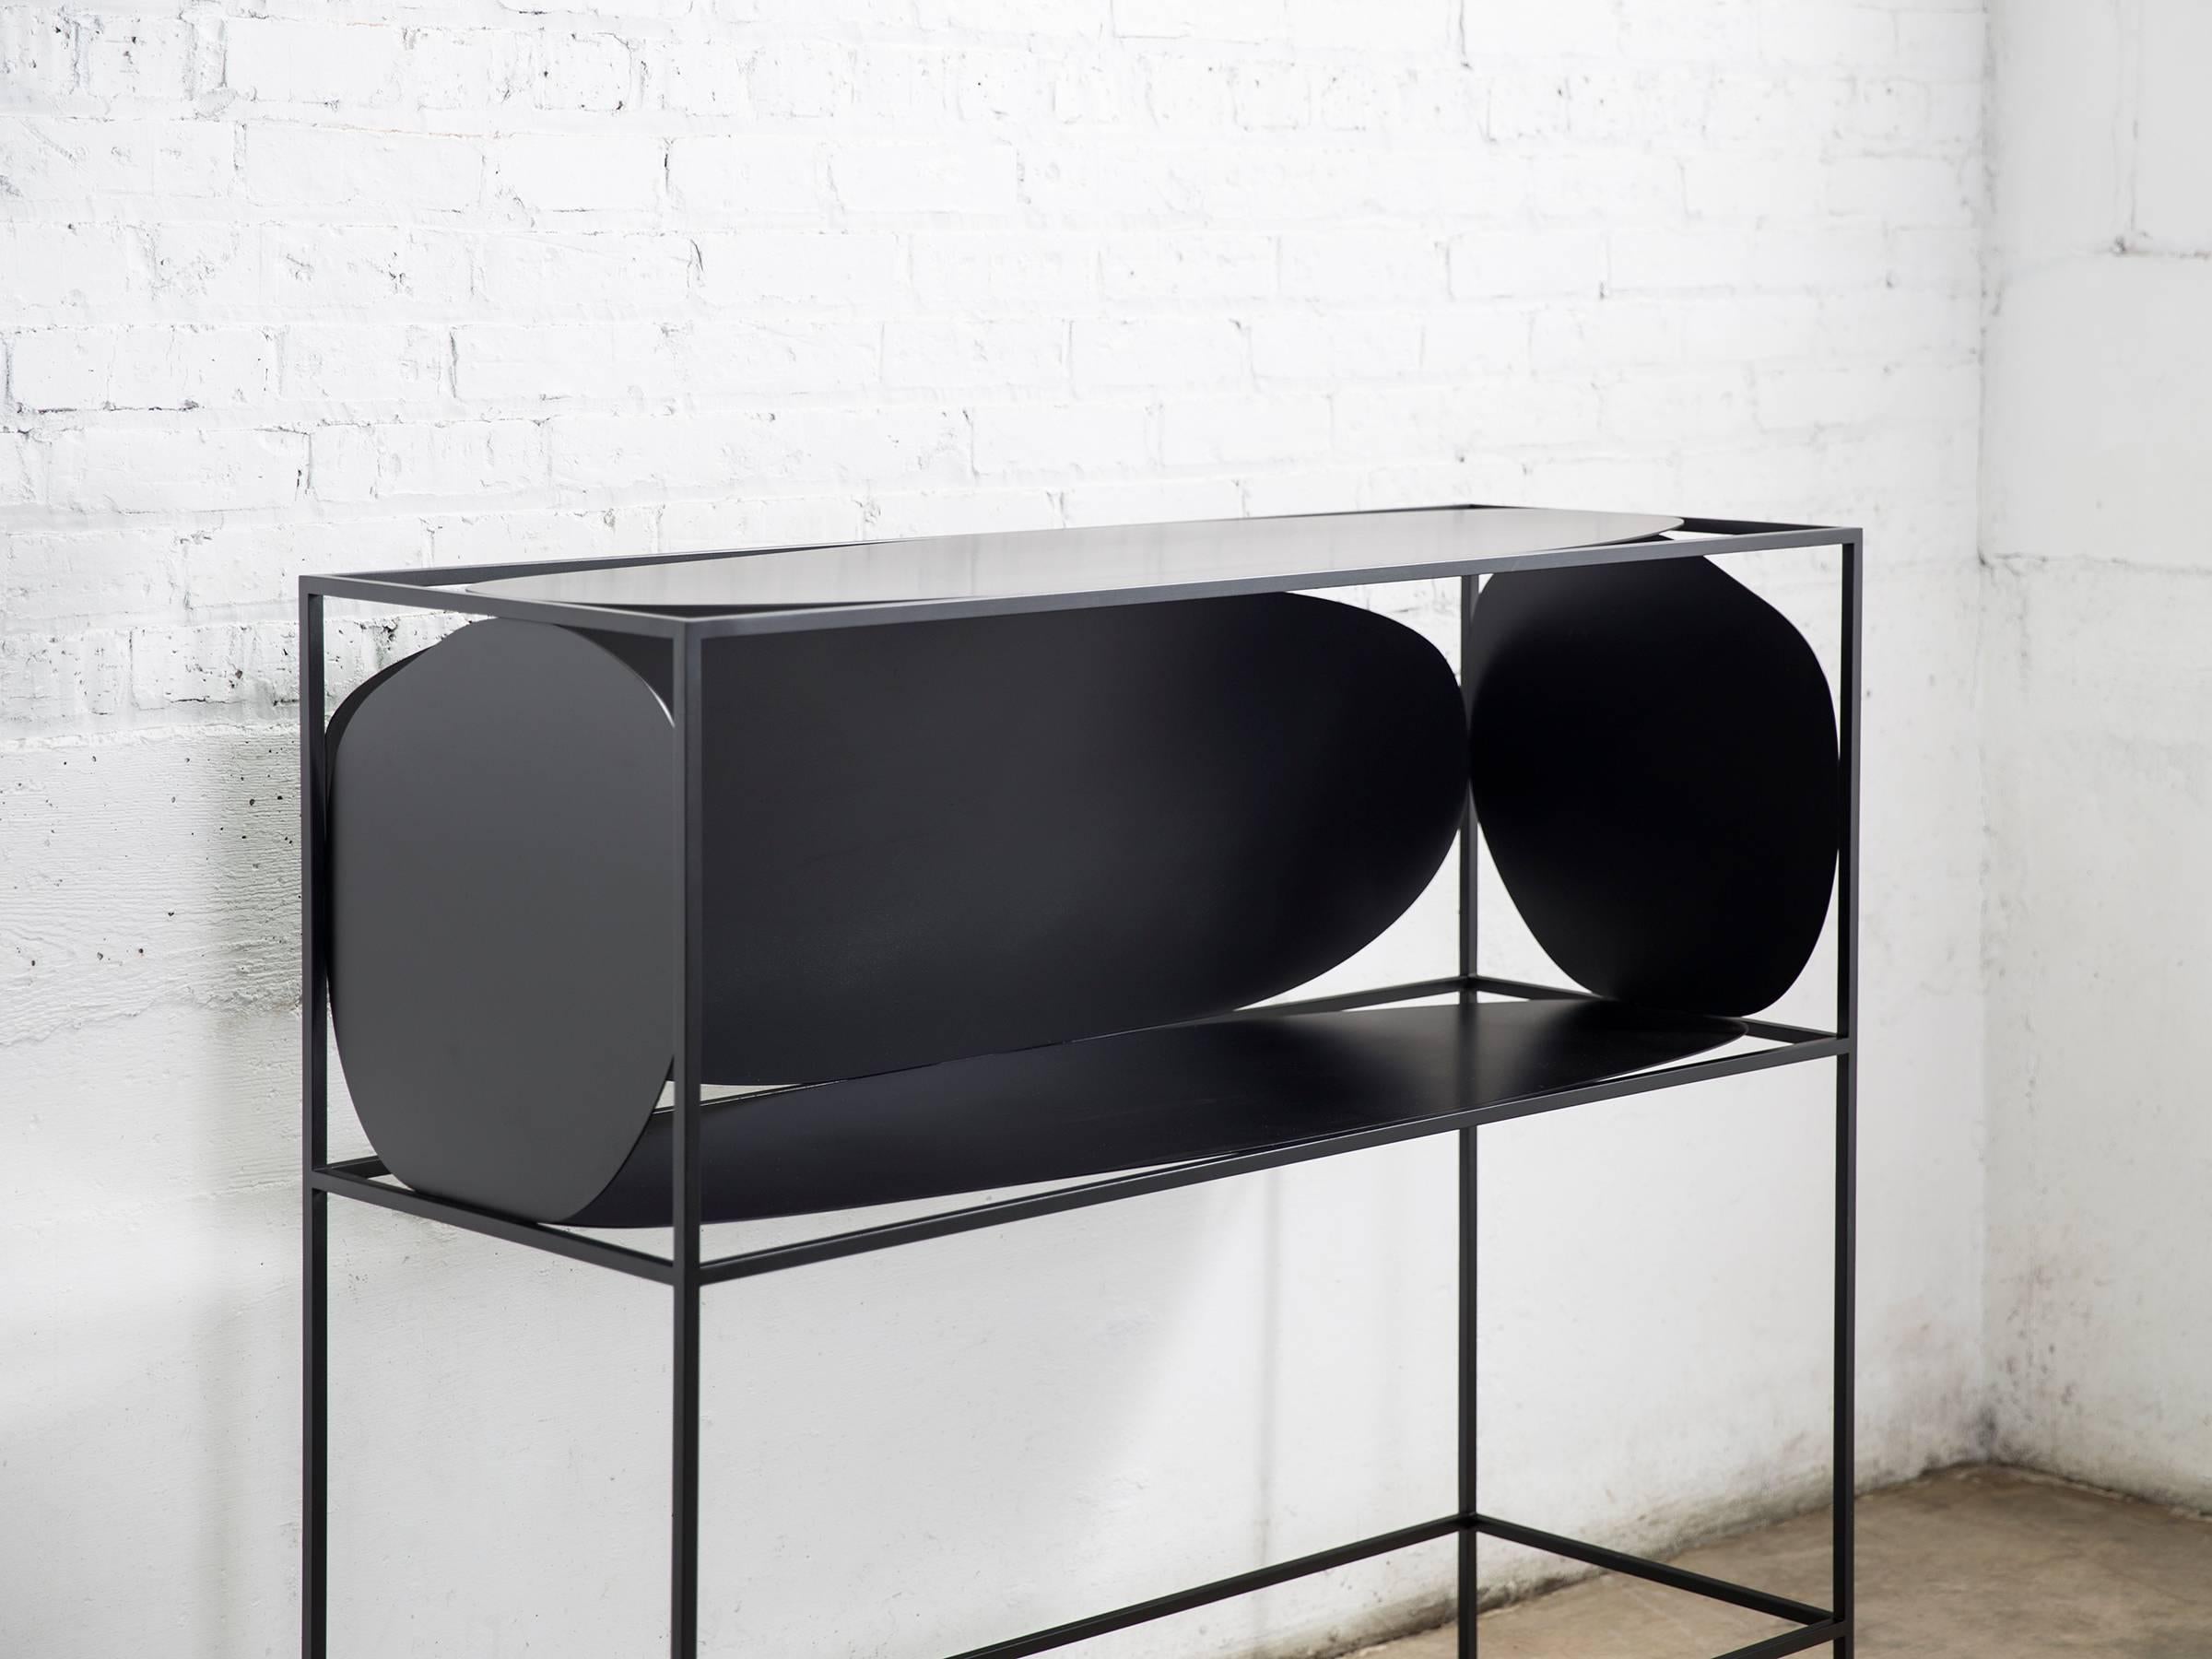 Hand-Painted Contemporary Sculptural Steel Black Credenza Buffet Bar Handcrafted USA For Sale